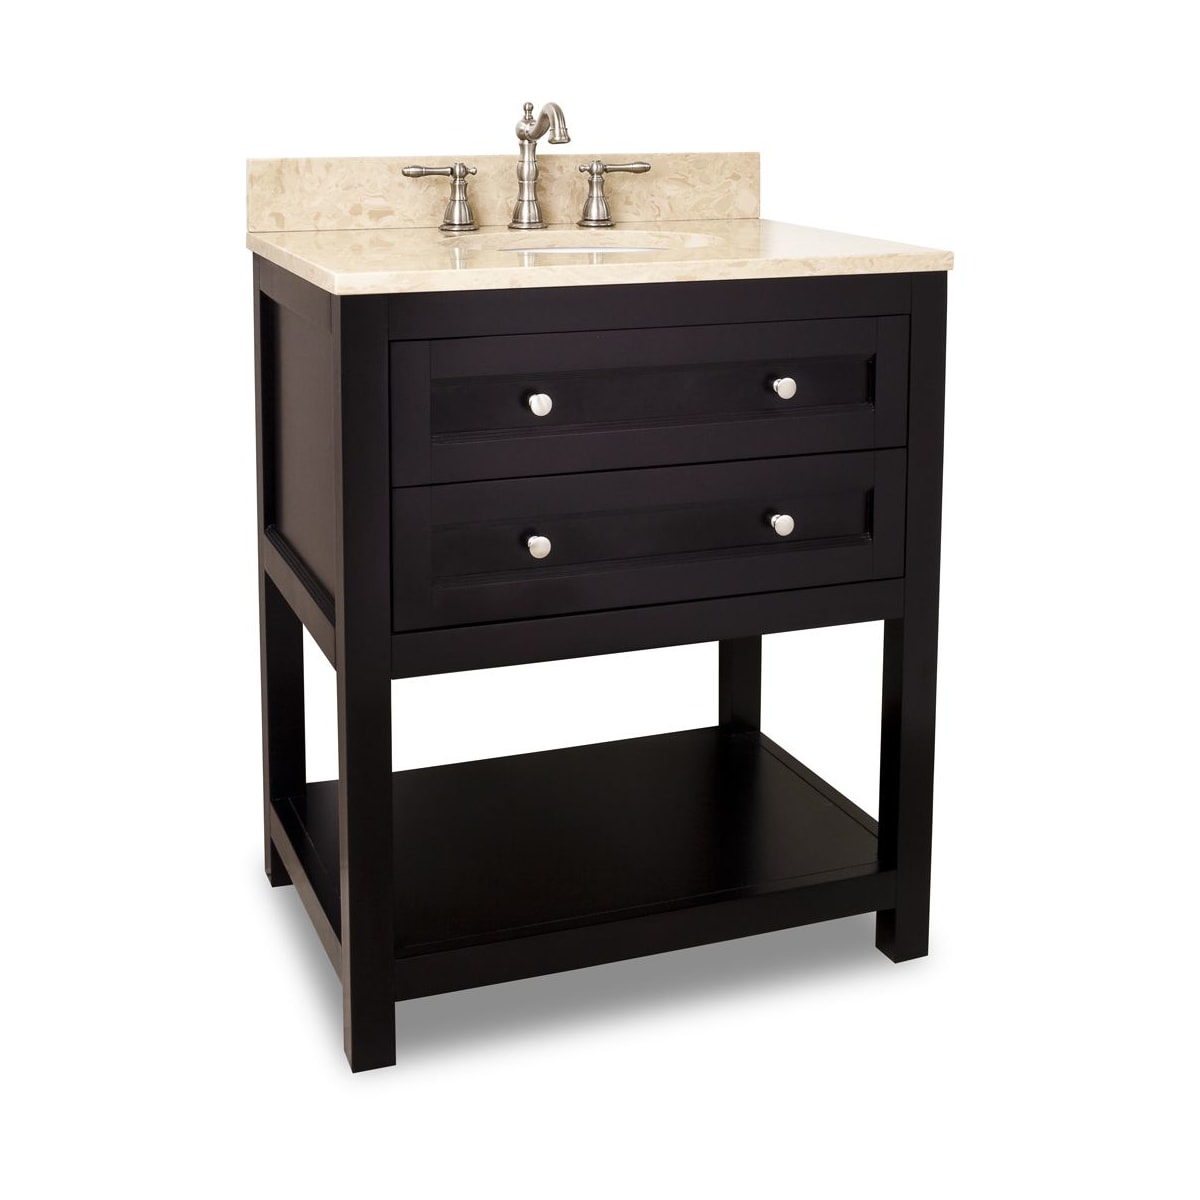 Cream Marble Astoria Modern Collection, 30 Inch Bathroom Vanity With Drawers